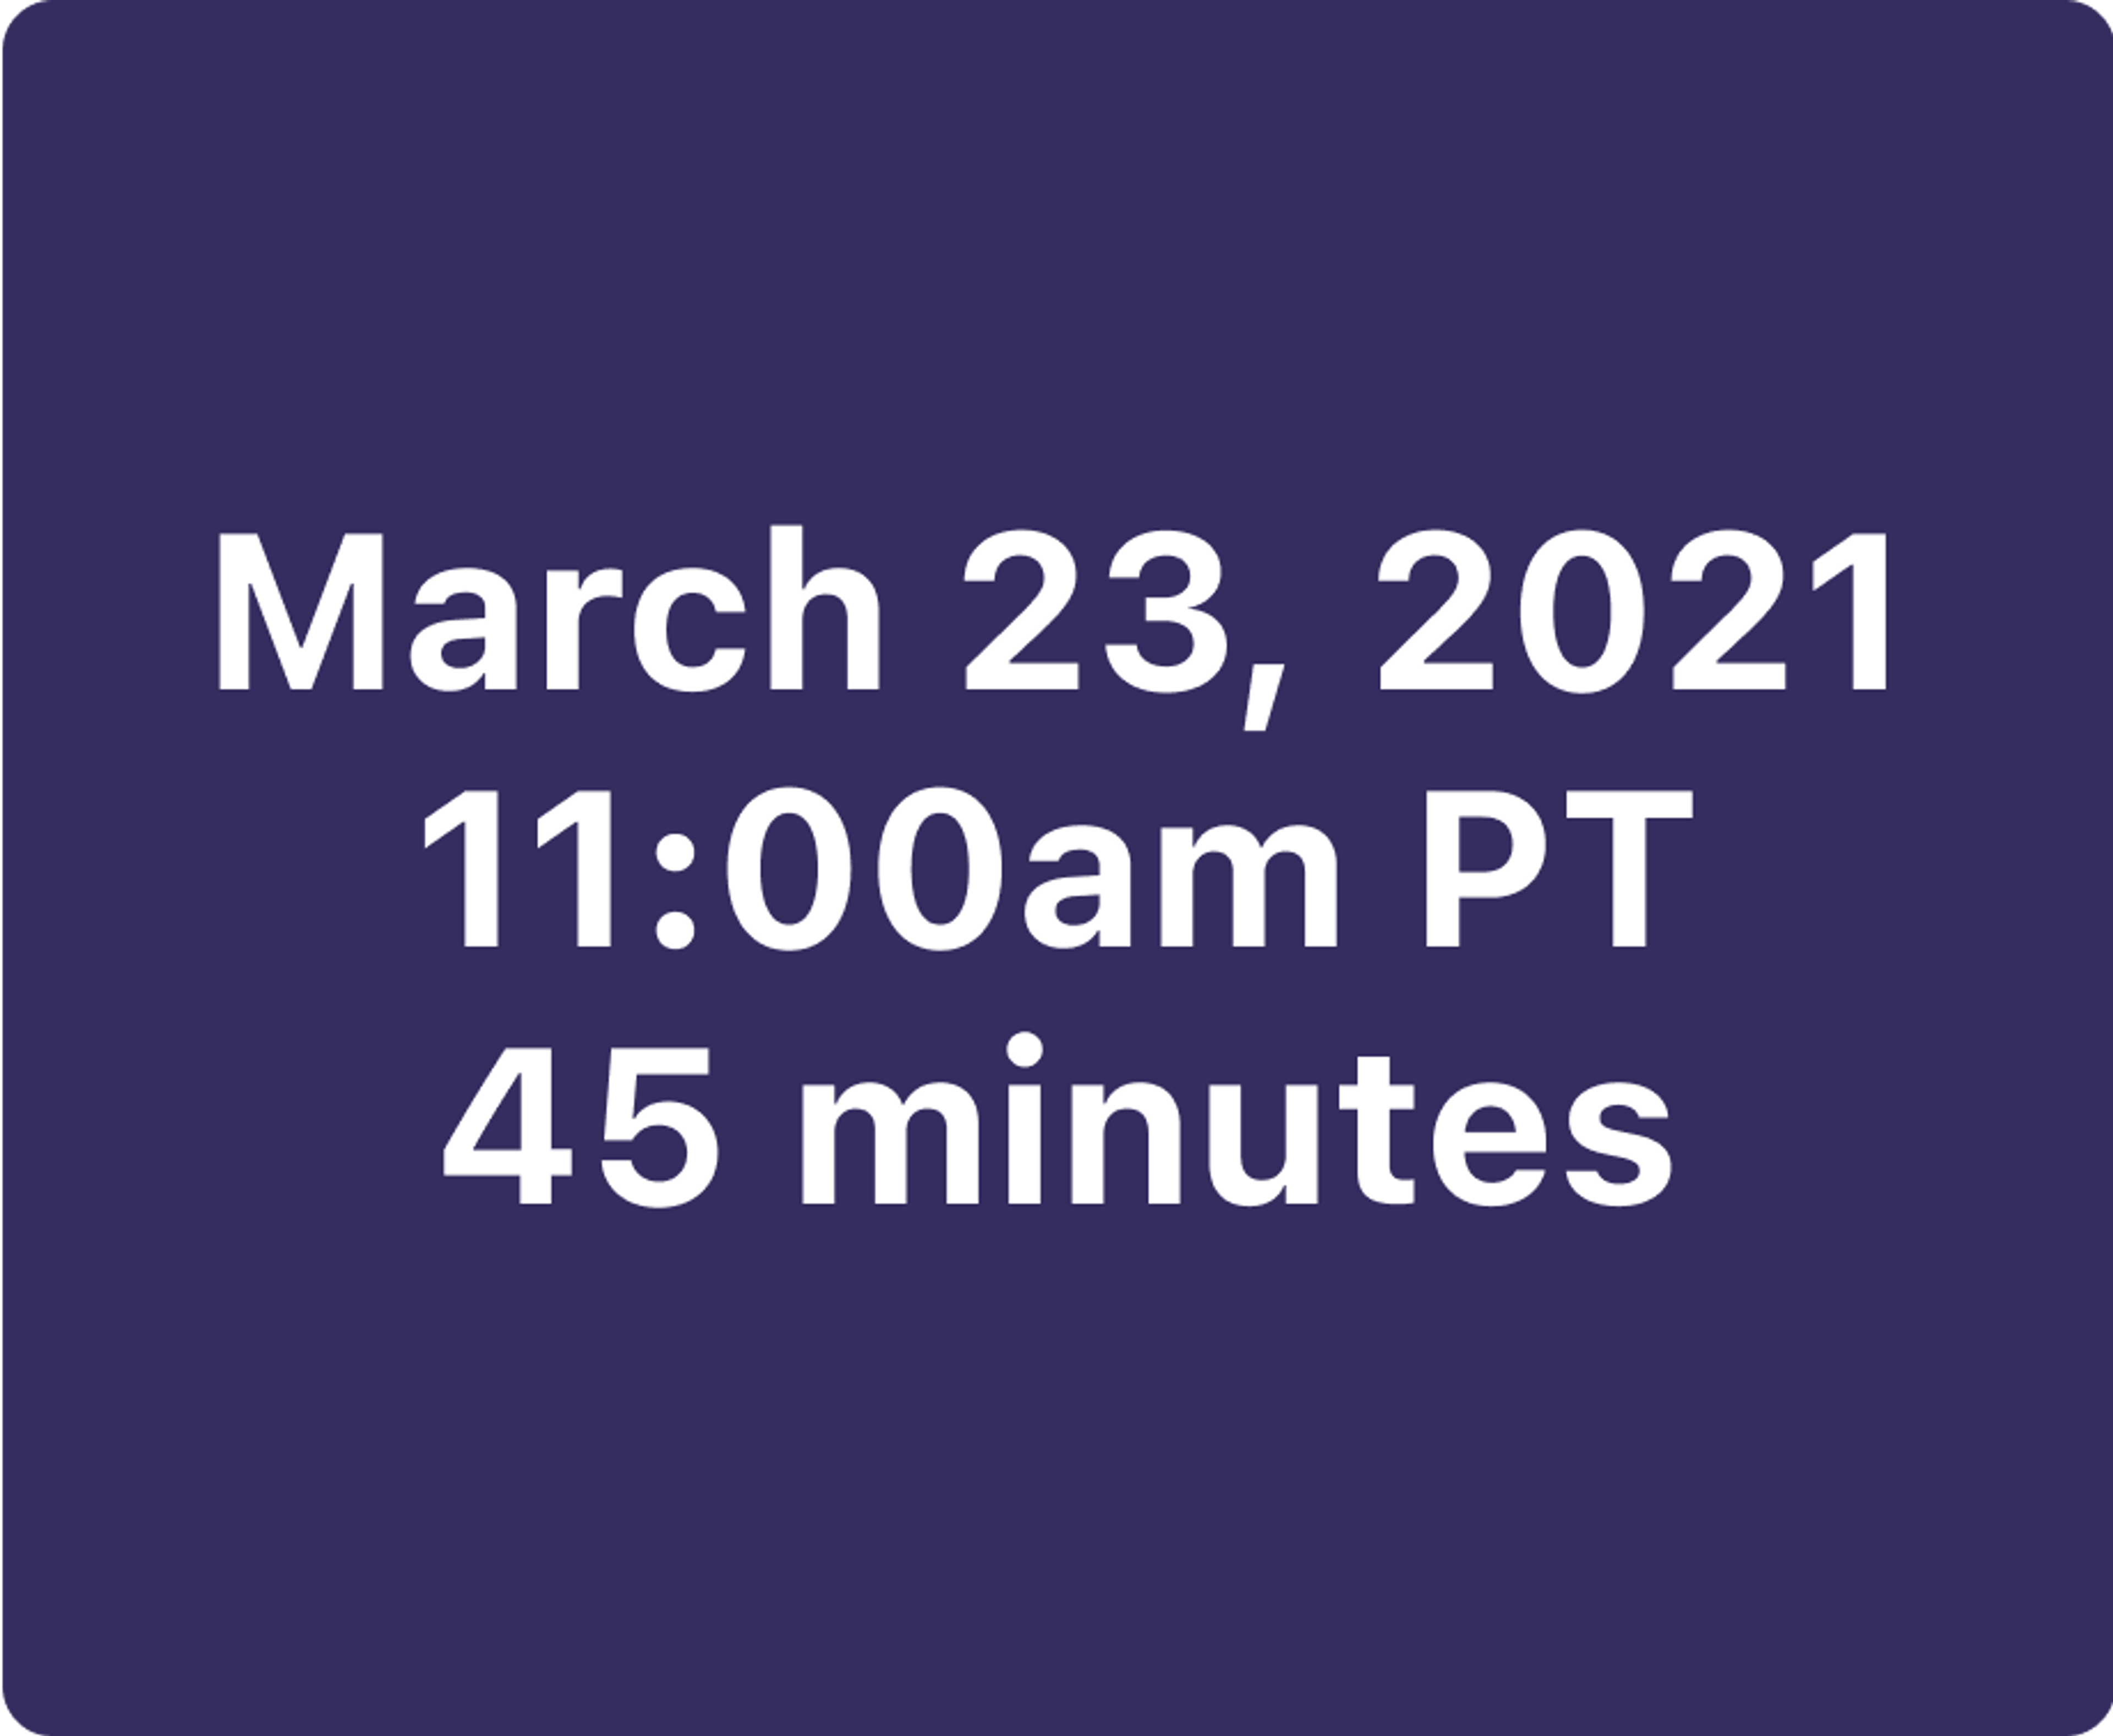 Webinar date and time